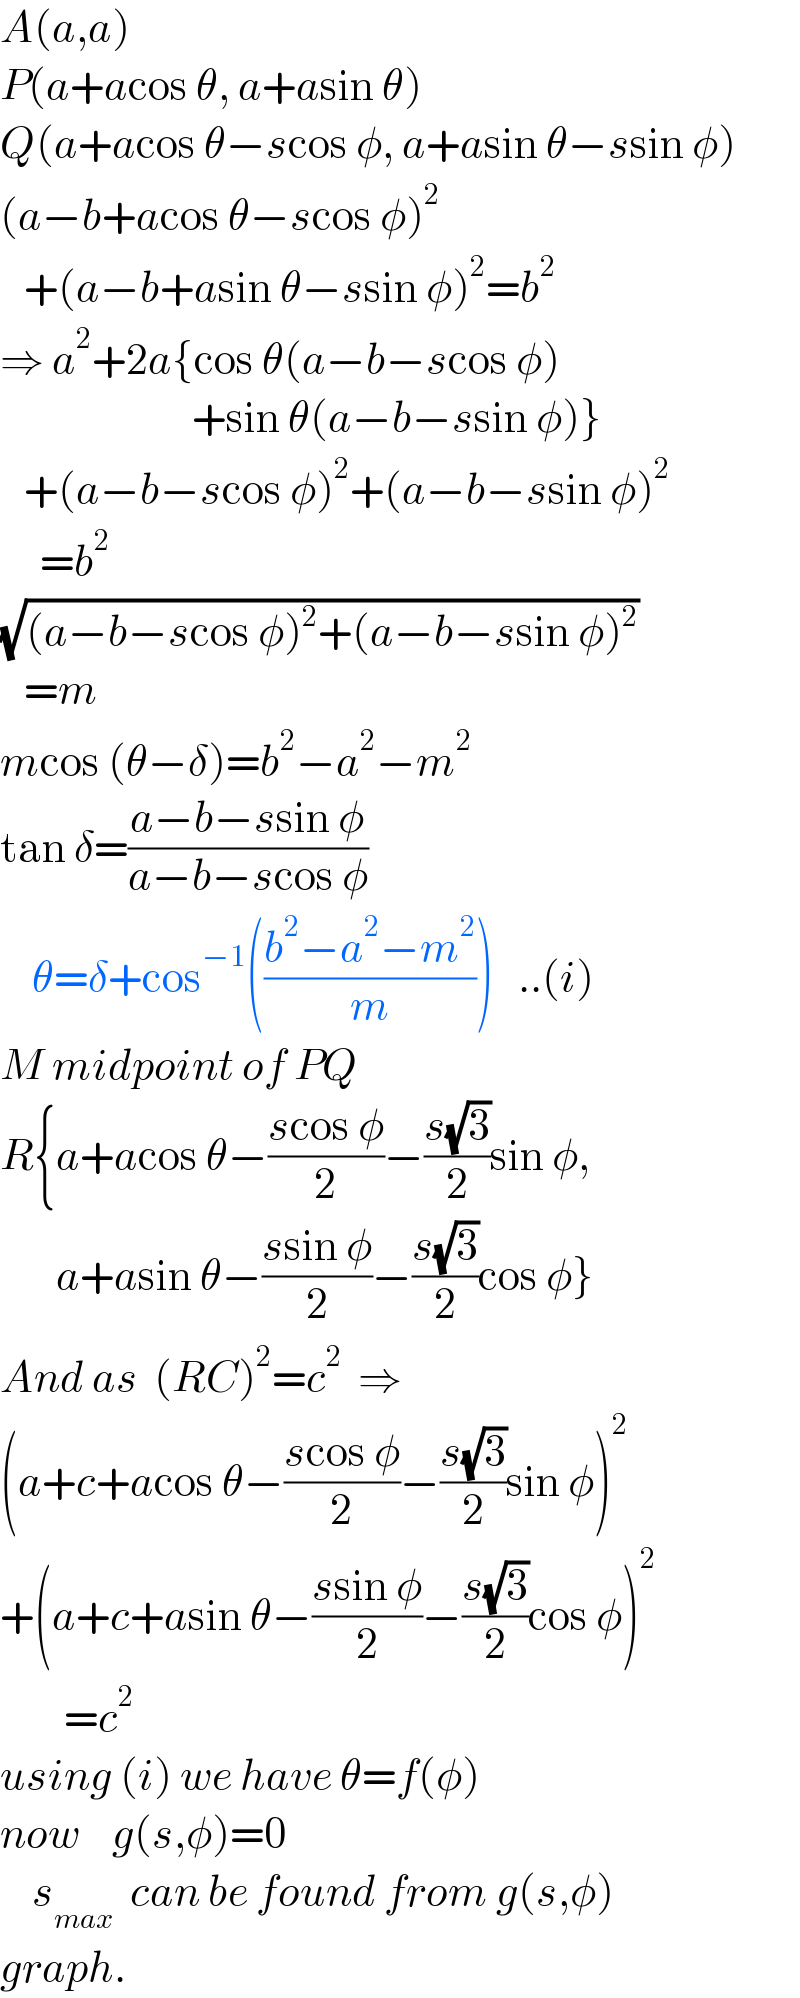 A(a,a)  P(a+acos θ, a+asin θ)  Q(a+acos θ−scos φ, a+asin θ−ssin φ)  (a−b+acos θ−scos φ)^2      +(a−b+asin θ−ssin φ)^2 =b^2   ⇒ a^2 +2a{cos θ(a−b−scos φ)                          +sin θ(a−b−ssin φ)}     +(a−b−scos φ)^2 +(a−b−ssin φ)^2        =b^2   (√((a−b−scos φ)^2 +(a−b−ssin φ)^2 ))     =m  mcos (θ−δ)=b^2 −a^2 −m^2   tan δ=((a−b−ssin φ)/(a−b−scos φ))      θ=δ+cos^(−1) (((b^2 −a^2 −m^2 )/m))   ..(i)  M midpoint of PQ  R{a+acos θ−((scos φ)/2)−((s(√3))/2)sin φ,         a+asin θ−((ssin φ)/2)−((s(√3))/2)cos φ}  And as  (RC)^2 =c^2   ⇒  (a+c+acos θ−((scos φ)/2)−((s(√3))/2)sin φ)^2   +(a+c+asin θ−((ssin φ)/2)−((s(√3))/2)cos φ)^2           =c^2   using (i) we have θ=f(φ)  now    g(s,φ)=0      s_(max)   can be found from g(s,φ)  graph.  